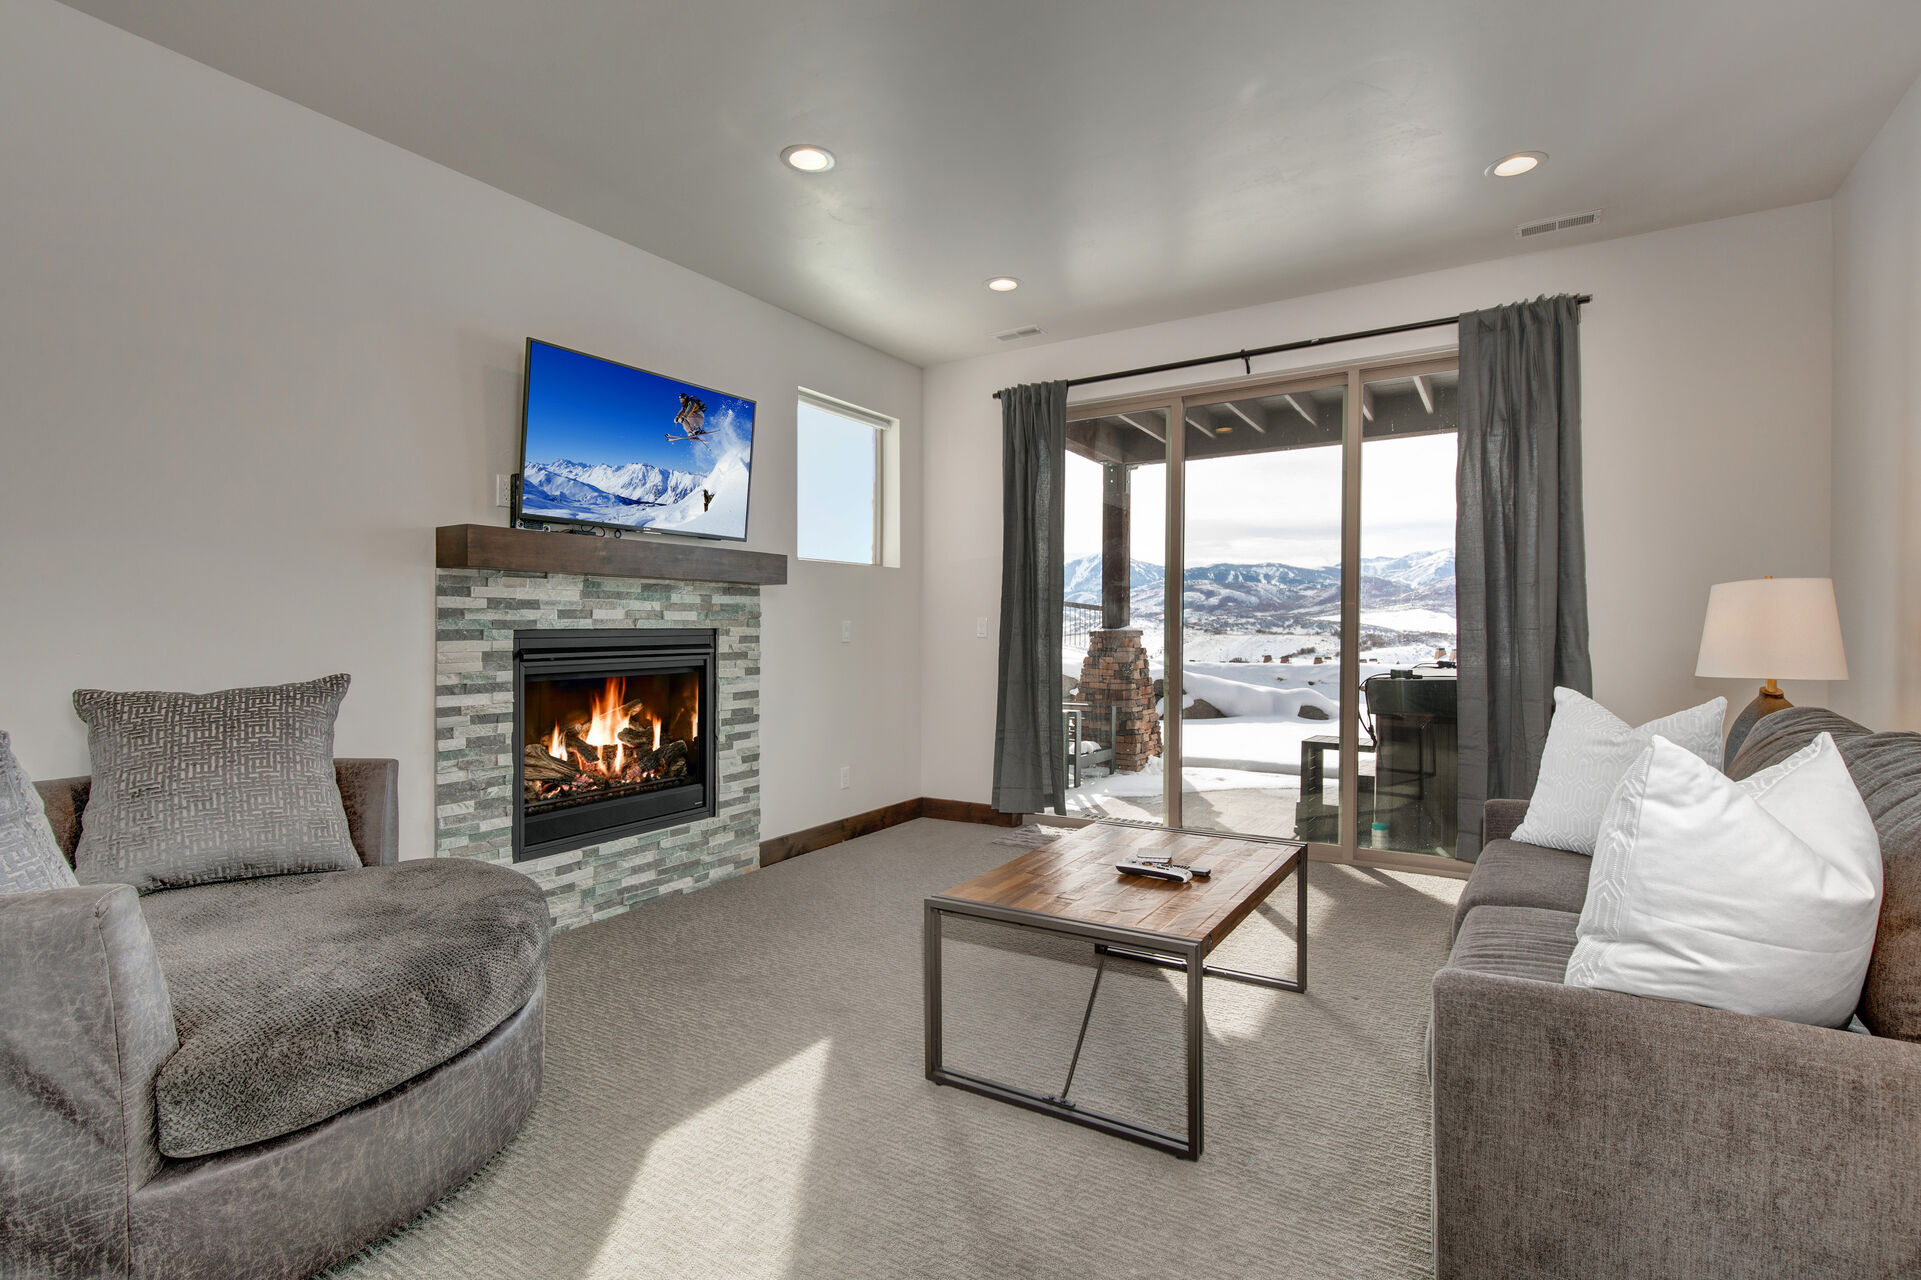 Lower Level Family Room with a Gas Fireplace, Smart TV and Patio Access with a Private Hot Tub and Views